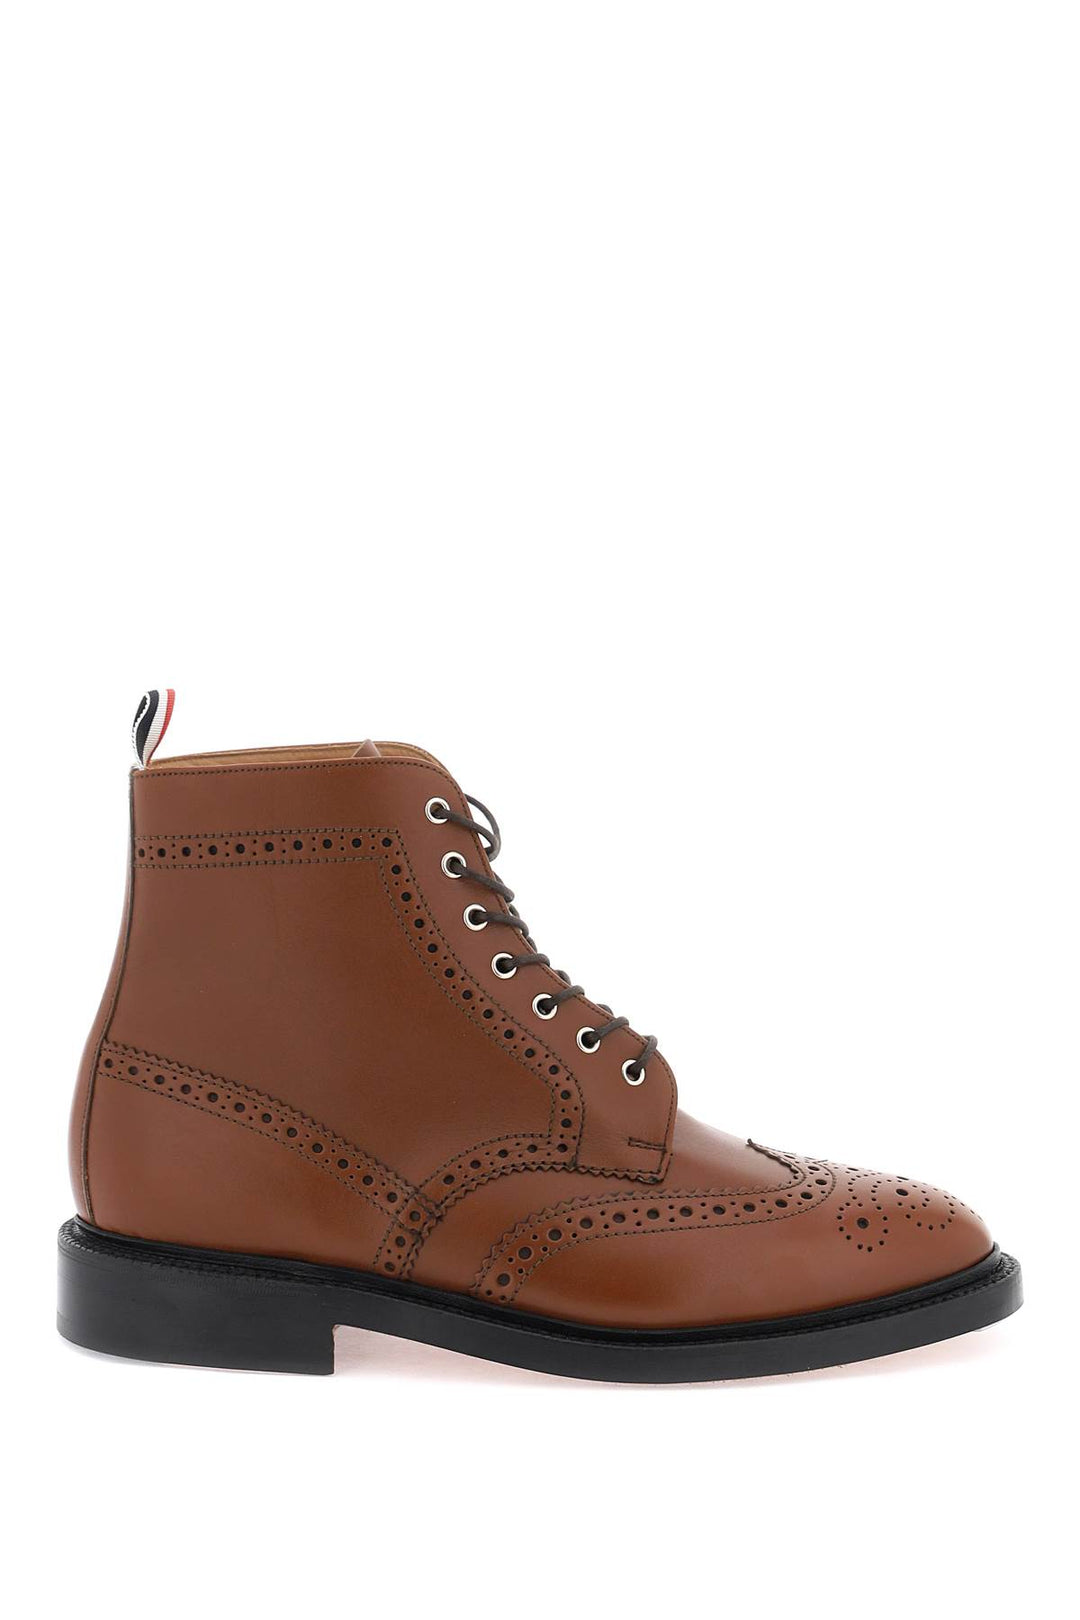 Thom Browne Wingtip Ankle Boots With Brogue Details   Marrone